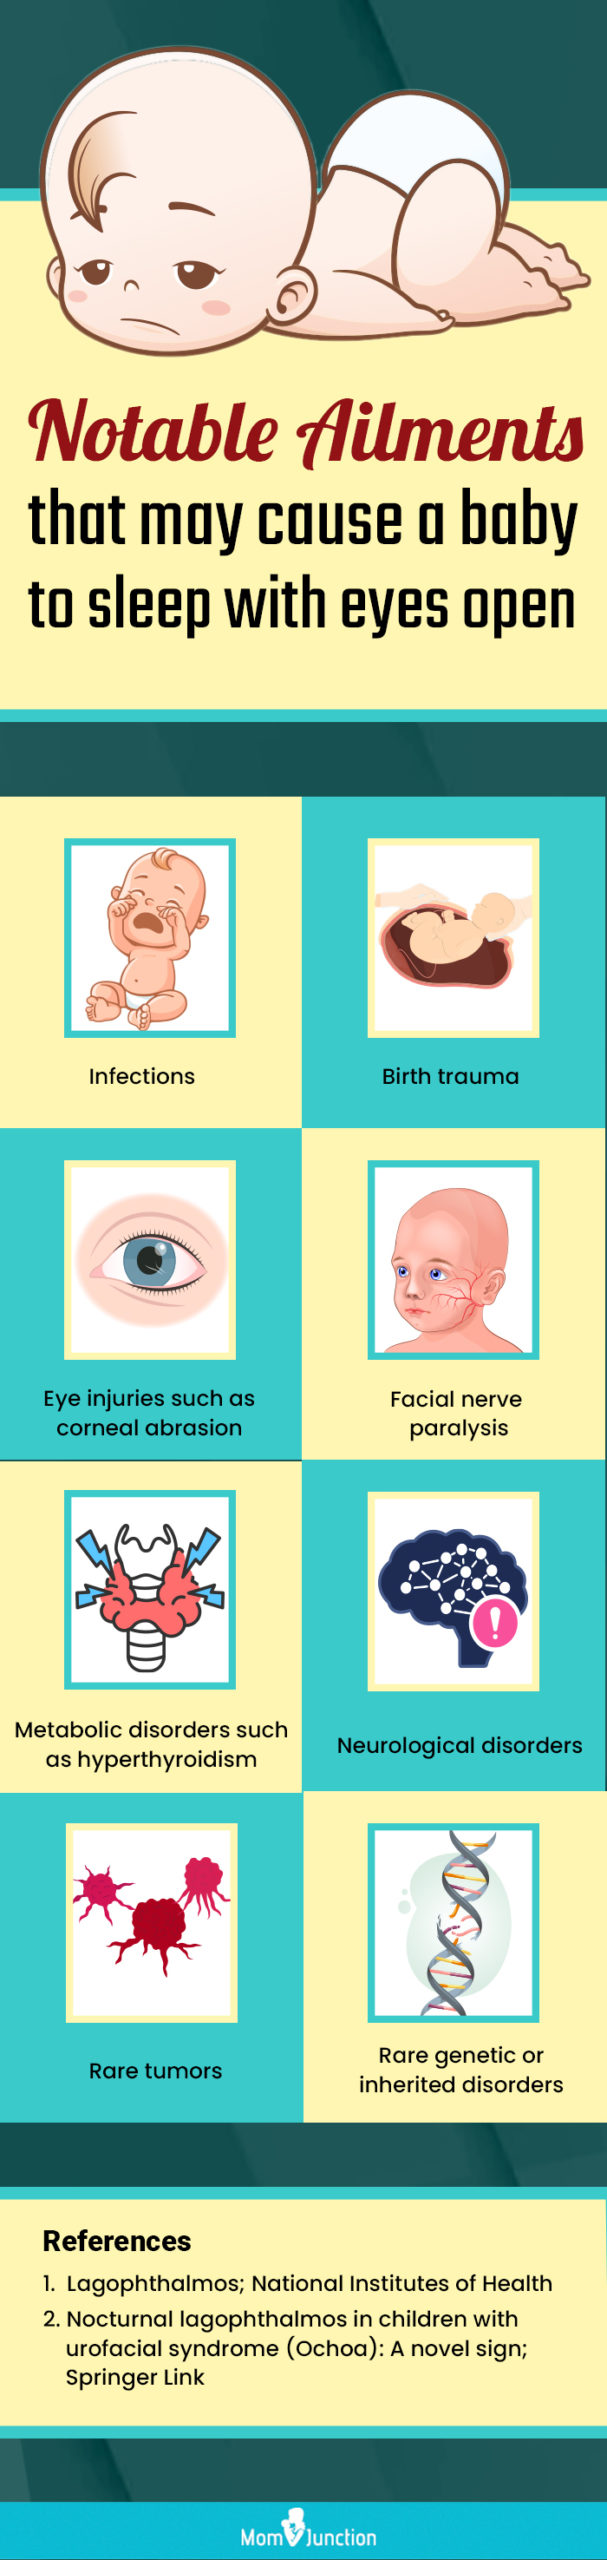 notable ailments that may cause a baby to sleep with eyes open (infographic)